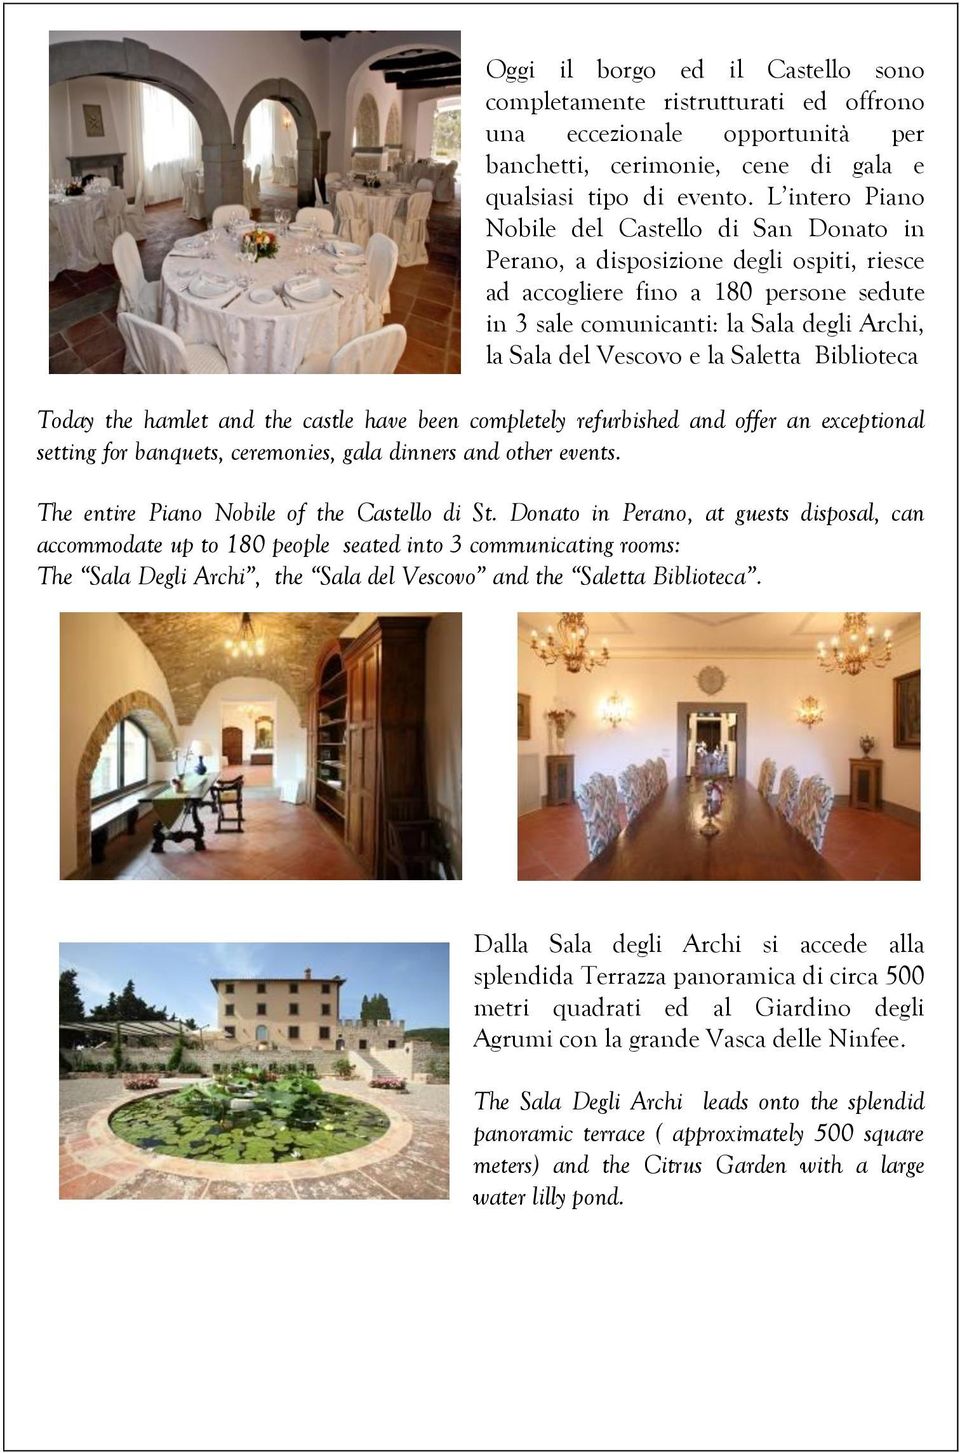 e la Saletta Biblioteca Today the hamlet and the castle have been completely refurbished and offer an exceptional setting for banquets, ceremonies, gala dinners and other events.